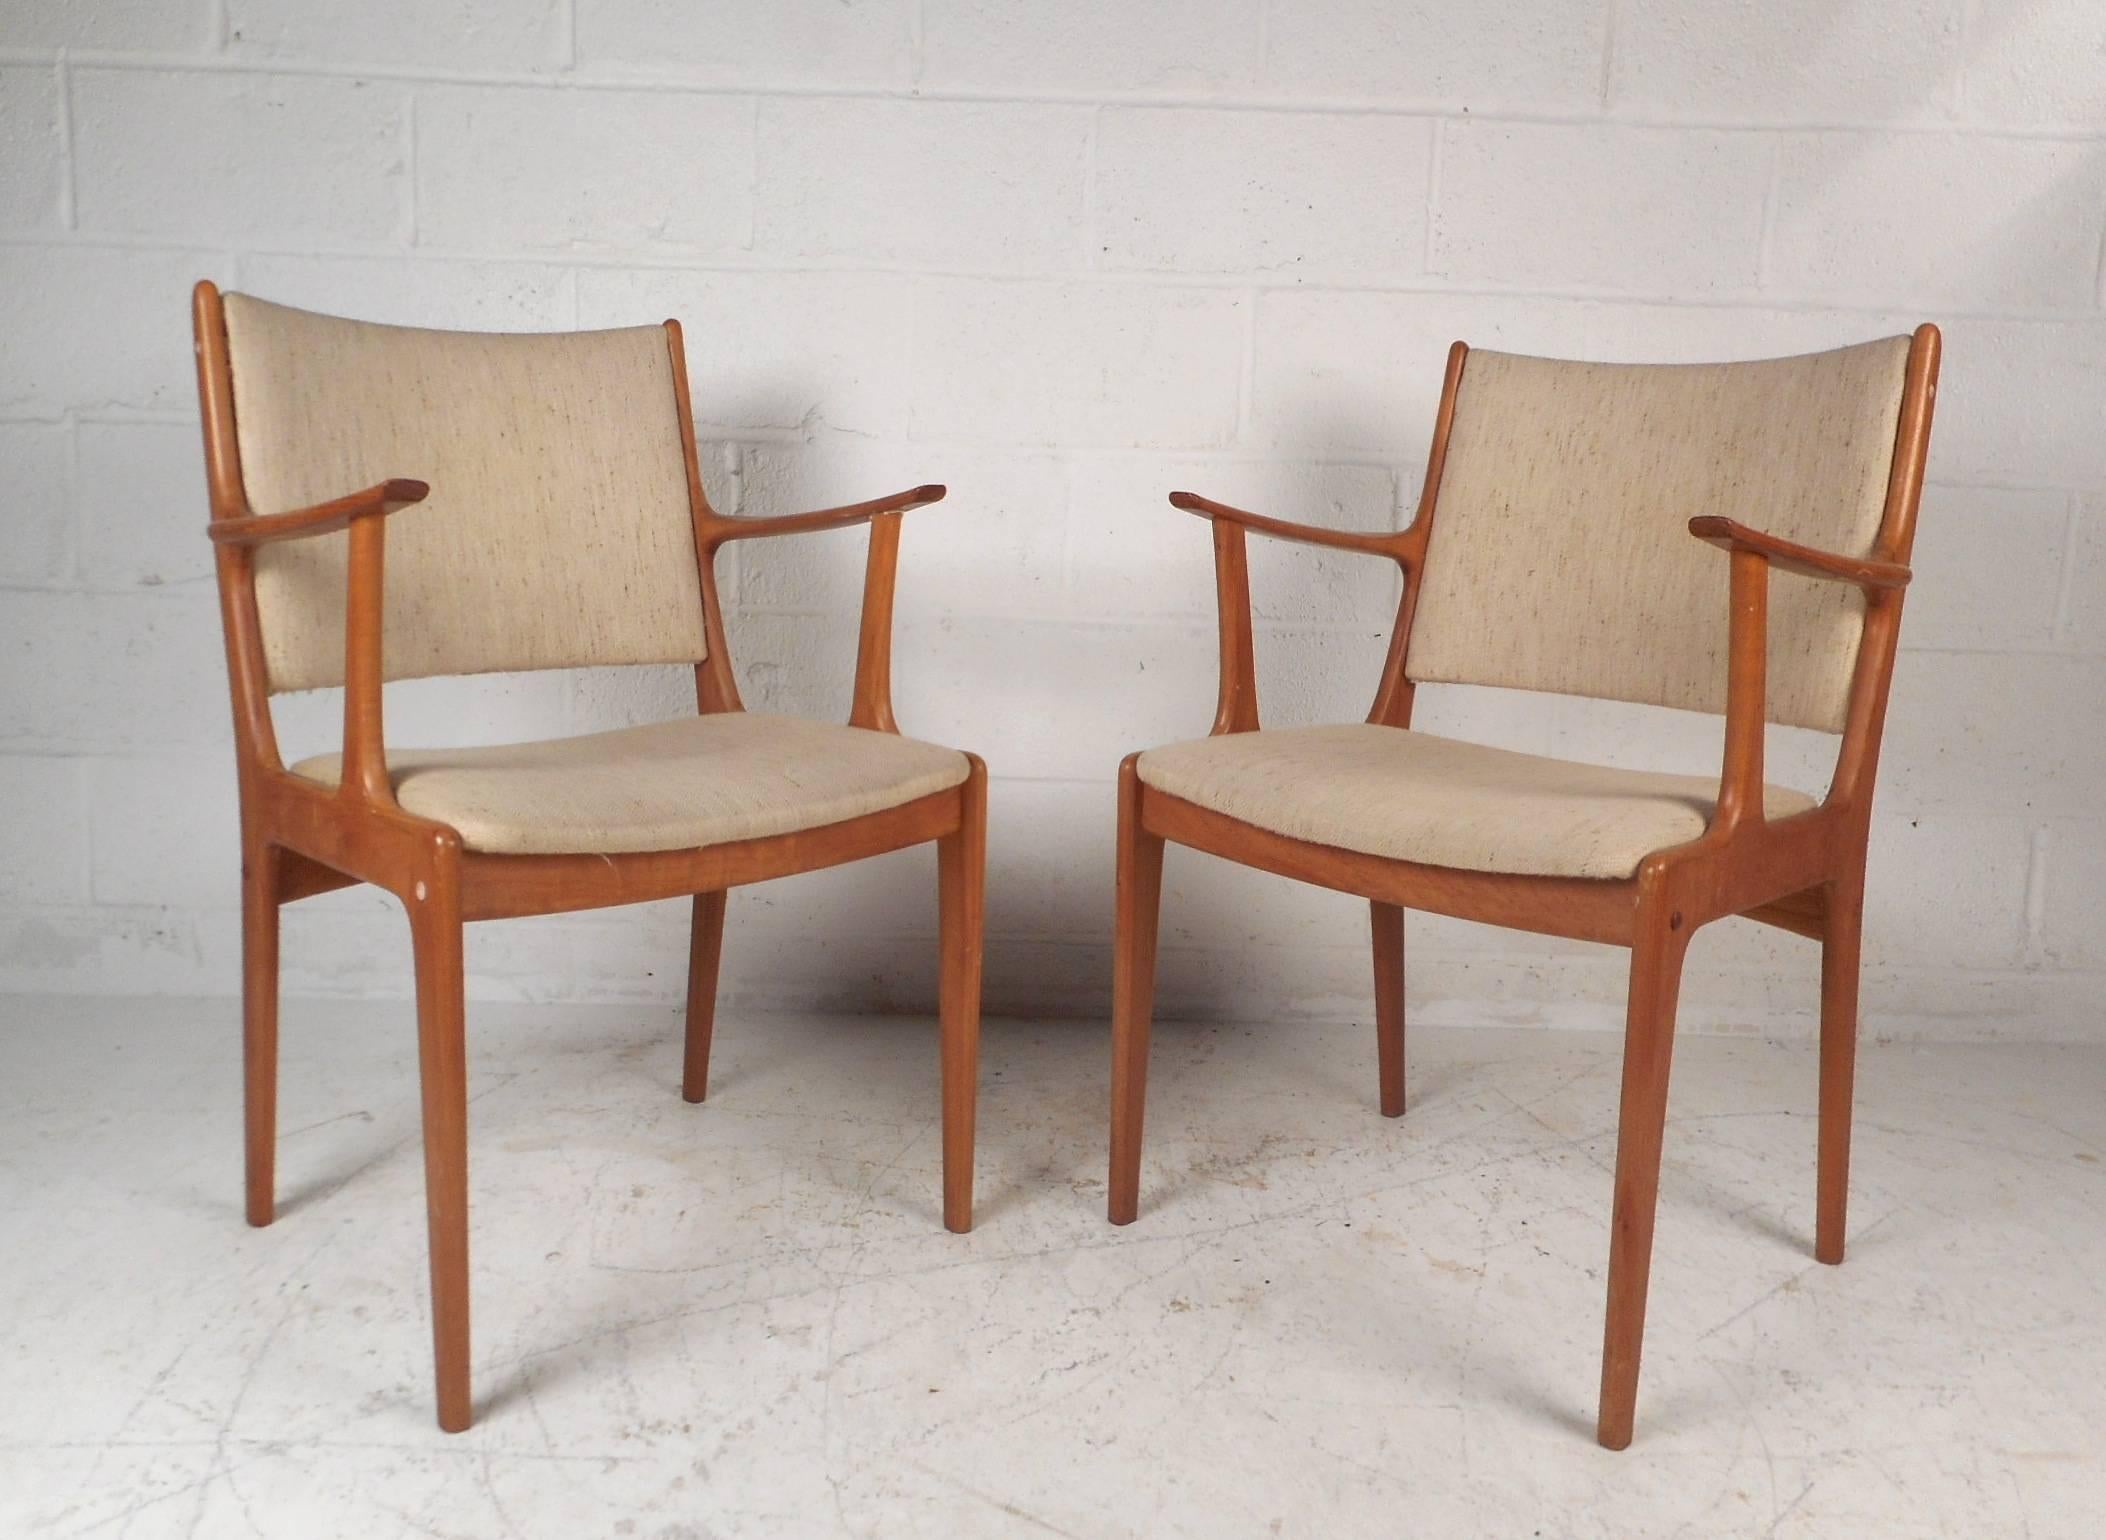 This gorgeous pair of vintage modern dining chairs feature unique angled arm rests and plush beige upholstery. Sleek and sturdy design with a high upholstered back rest and elegant teak wood grain throughout. The sculpted arm rests and soft fabric